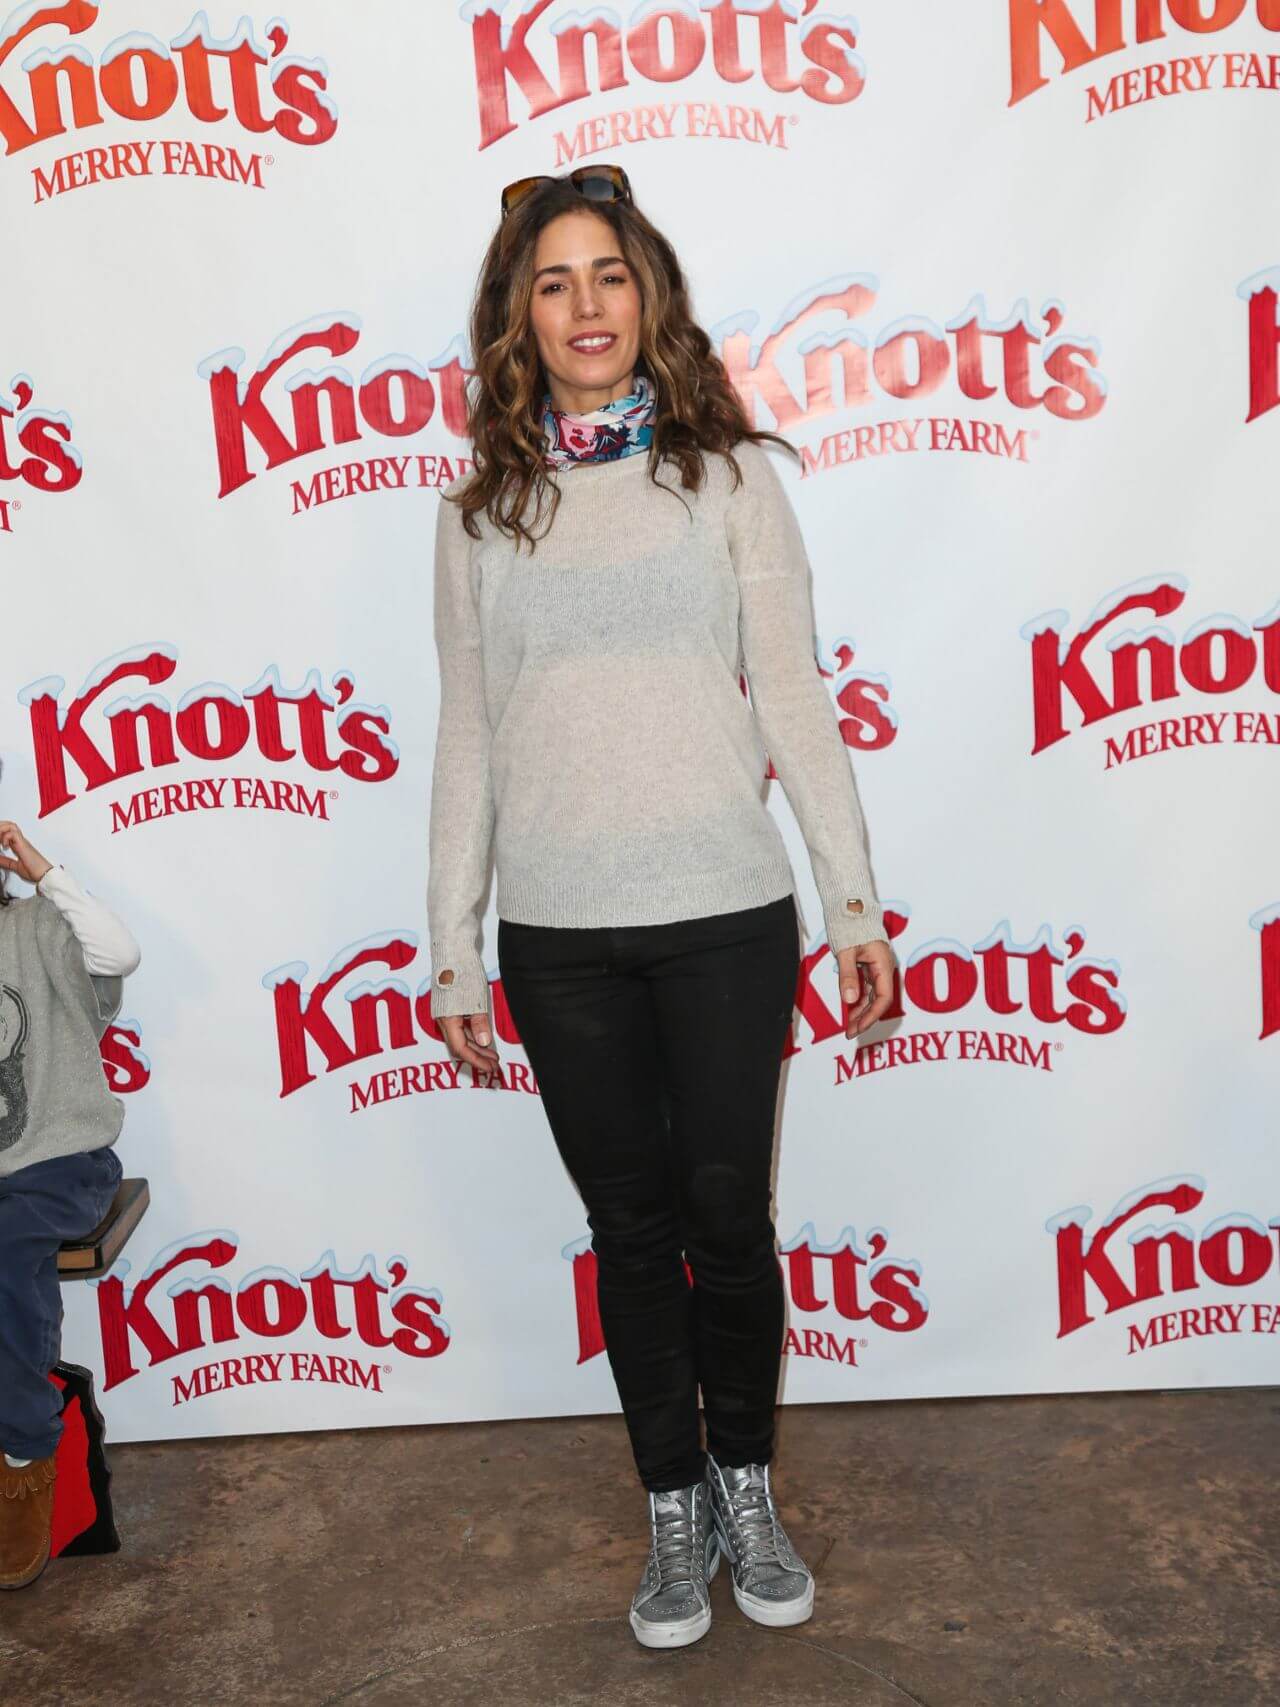 Ana Ortiz In Off White Woolen Sheering Top With Black Jeans & Colorful Neck Scarf At Knott’s Merry Farm Countdown to Christmas & Tree Lighting